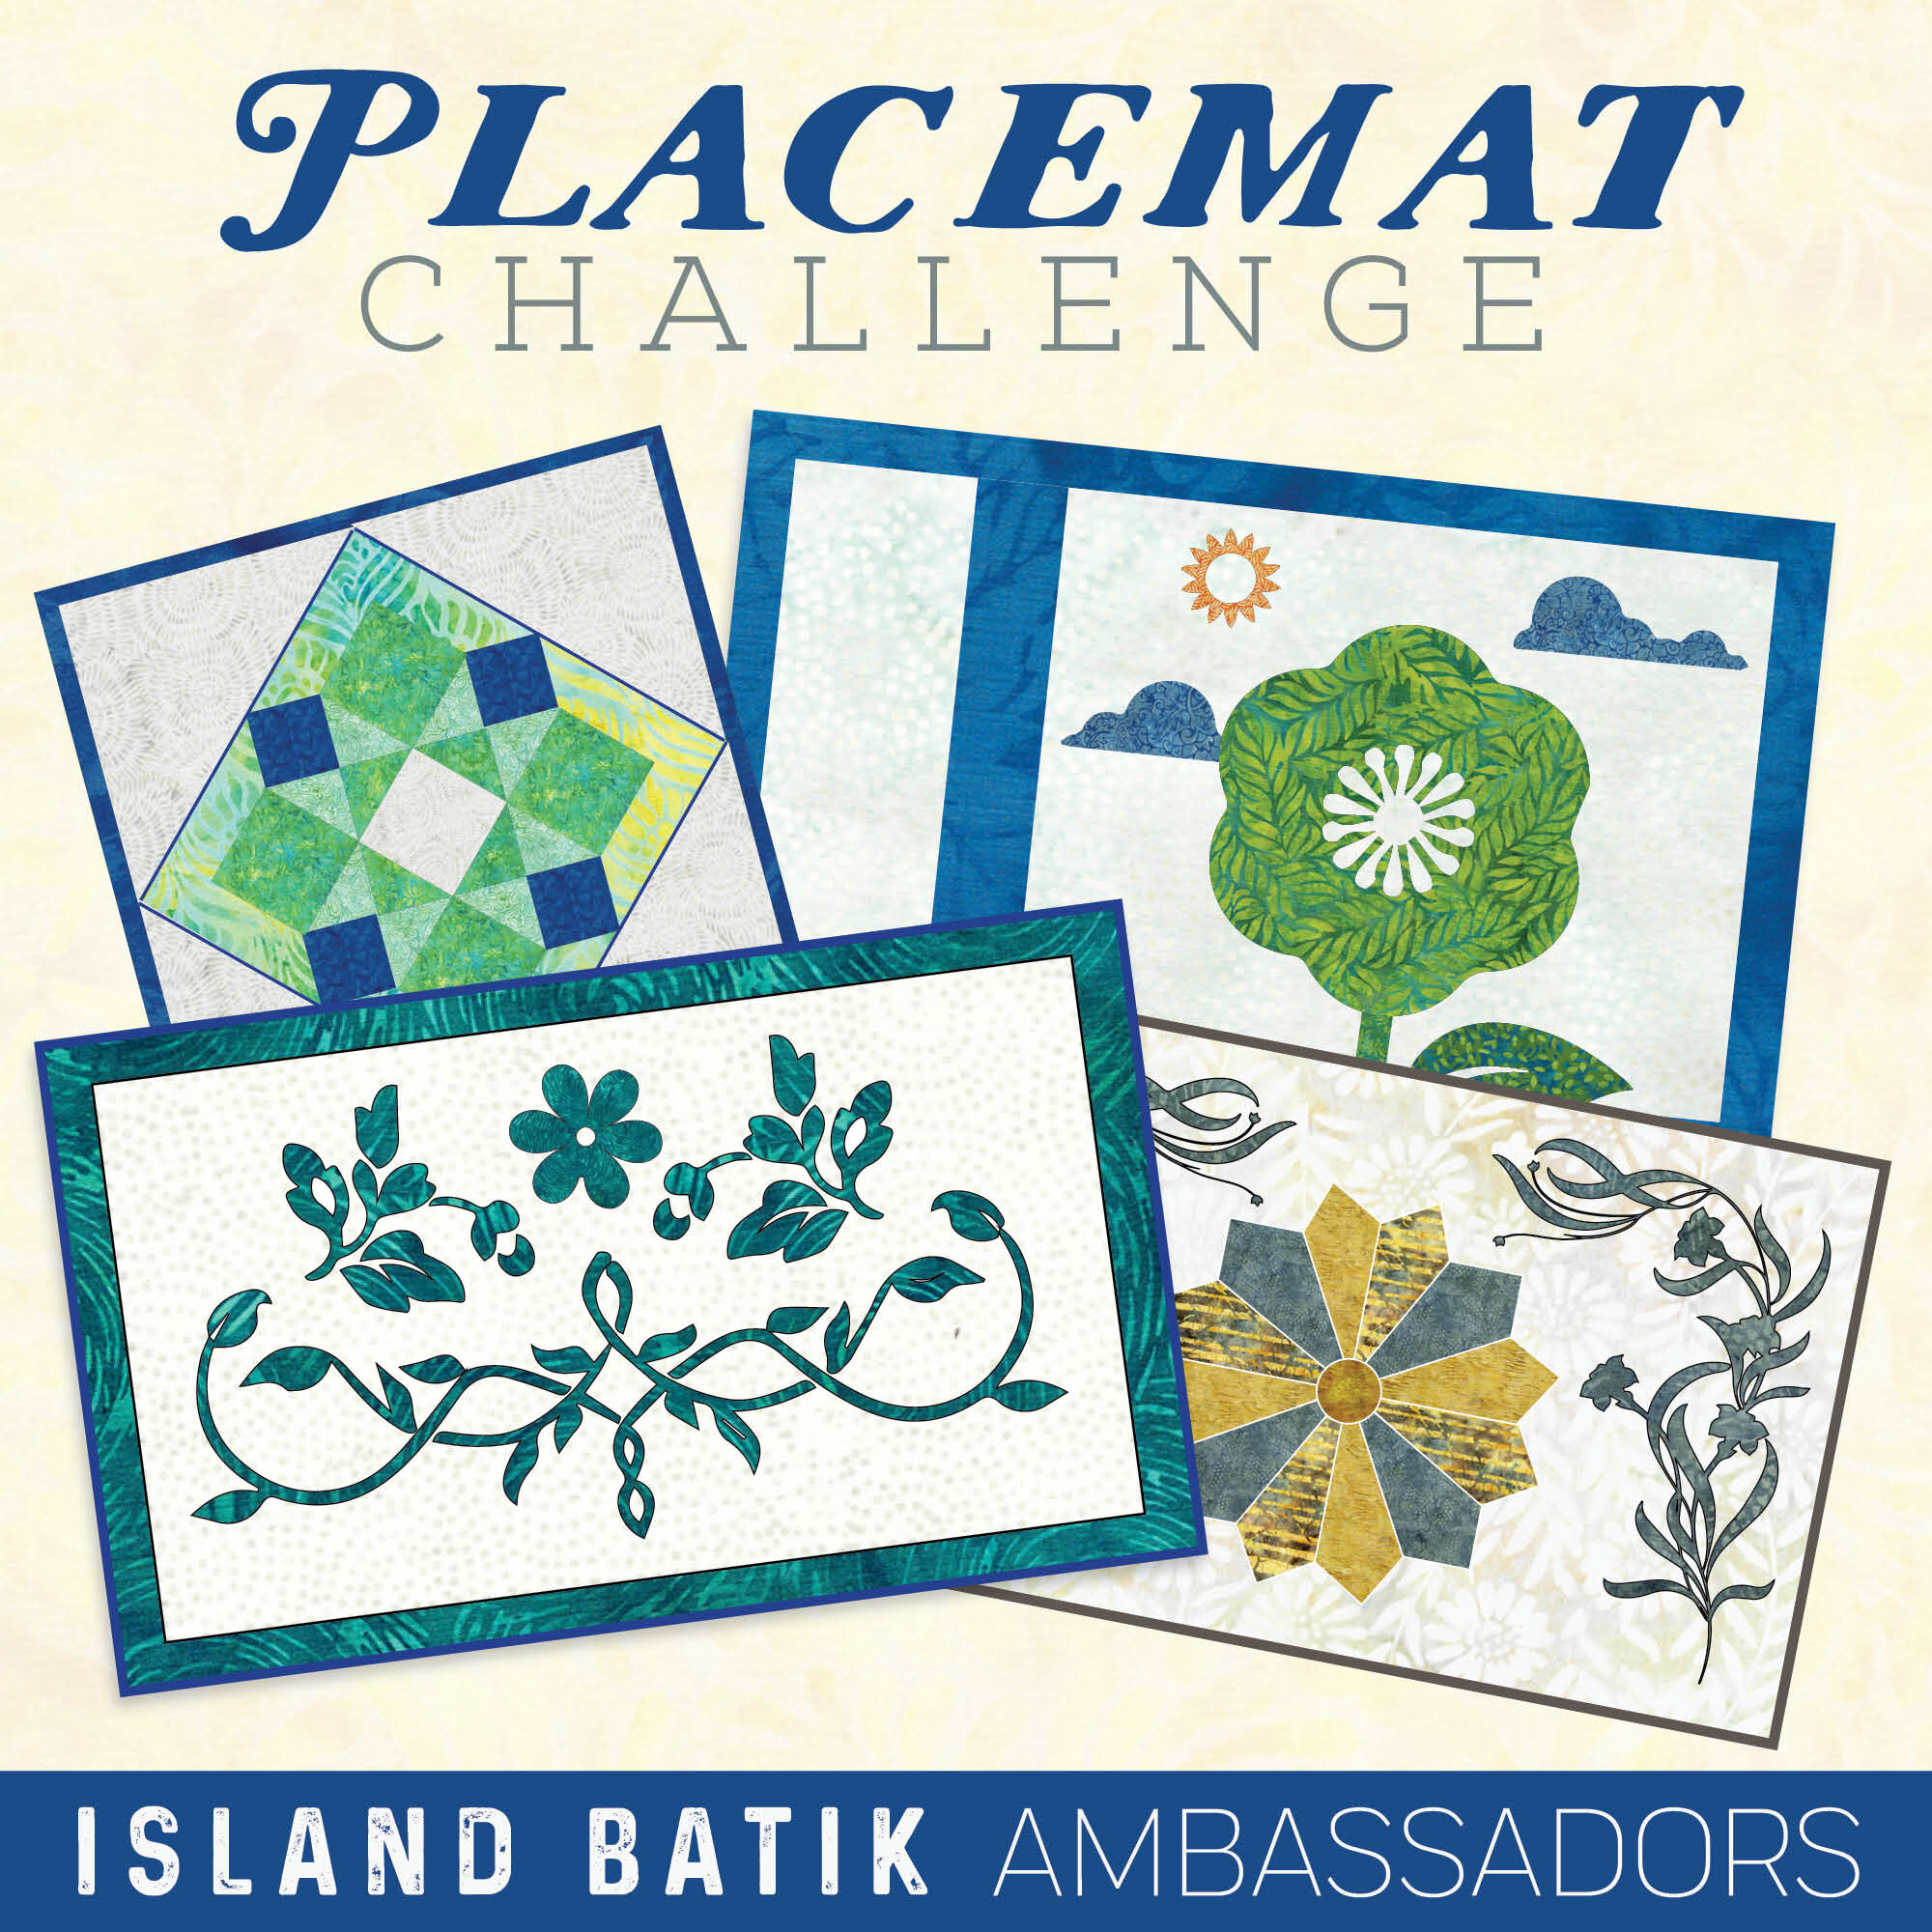 01 - Placemat Challenge Graphic.jpg